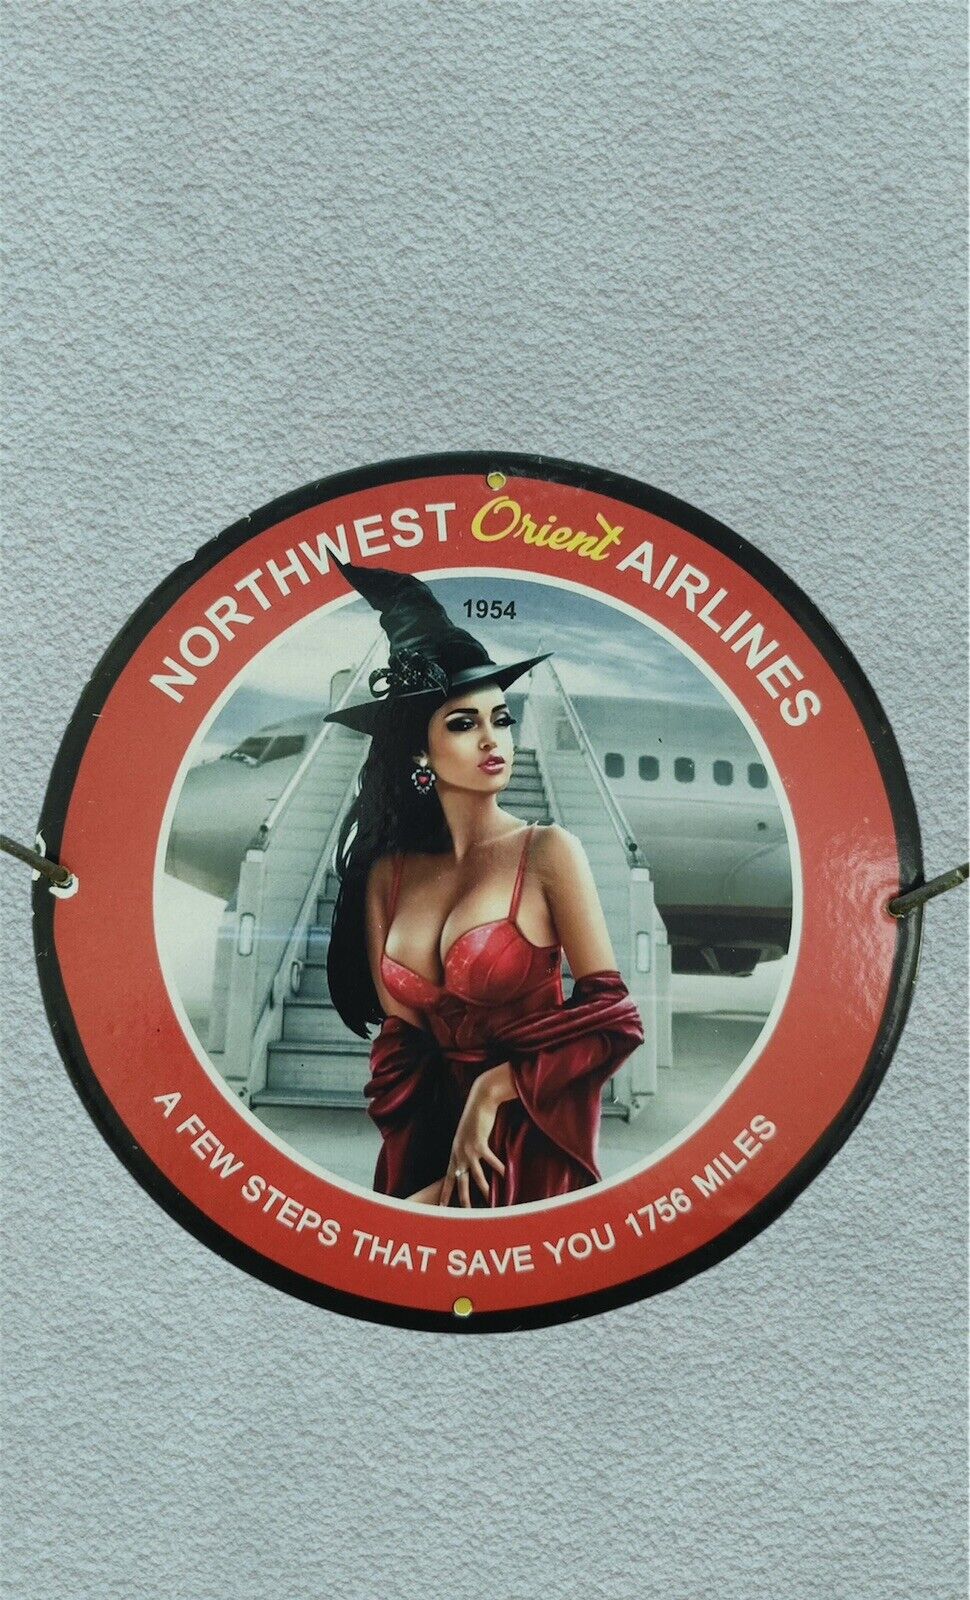 RARE NORTHWEST ORIENT AIRLINES PINUP BABE PORCELAIN GAS OIL AVIATION PUMP SIGN